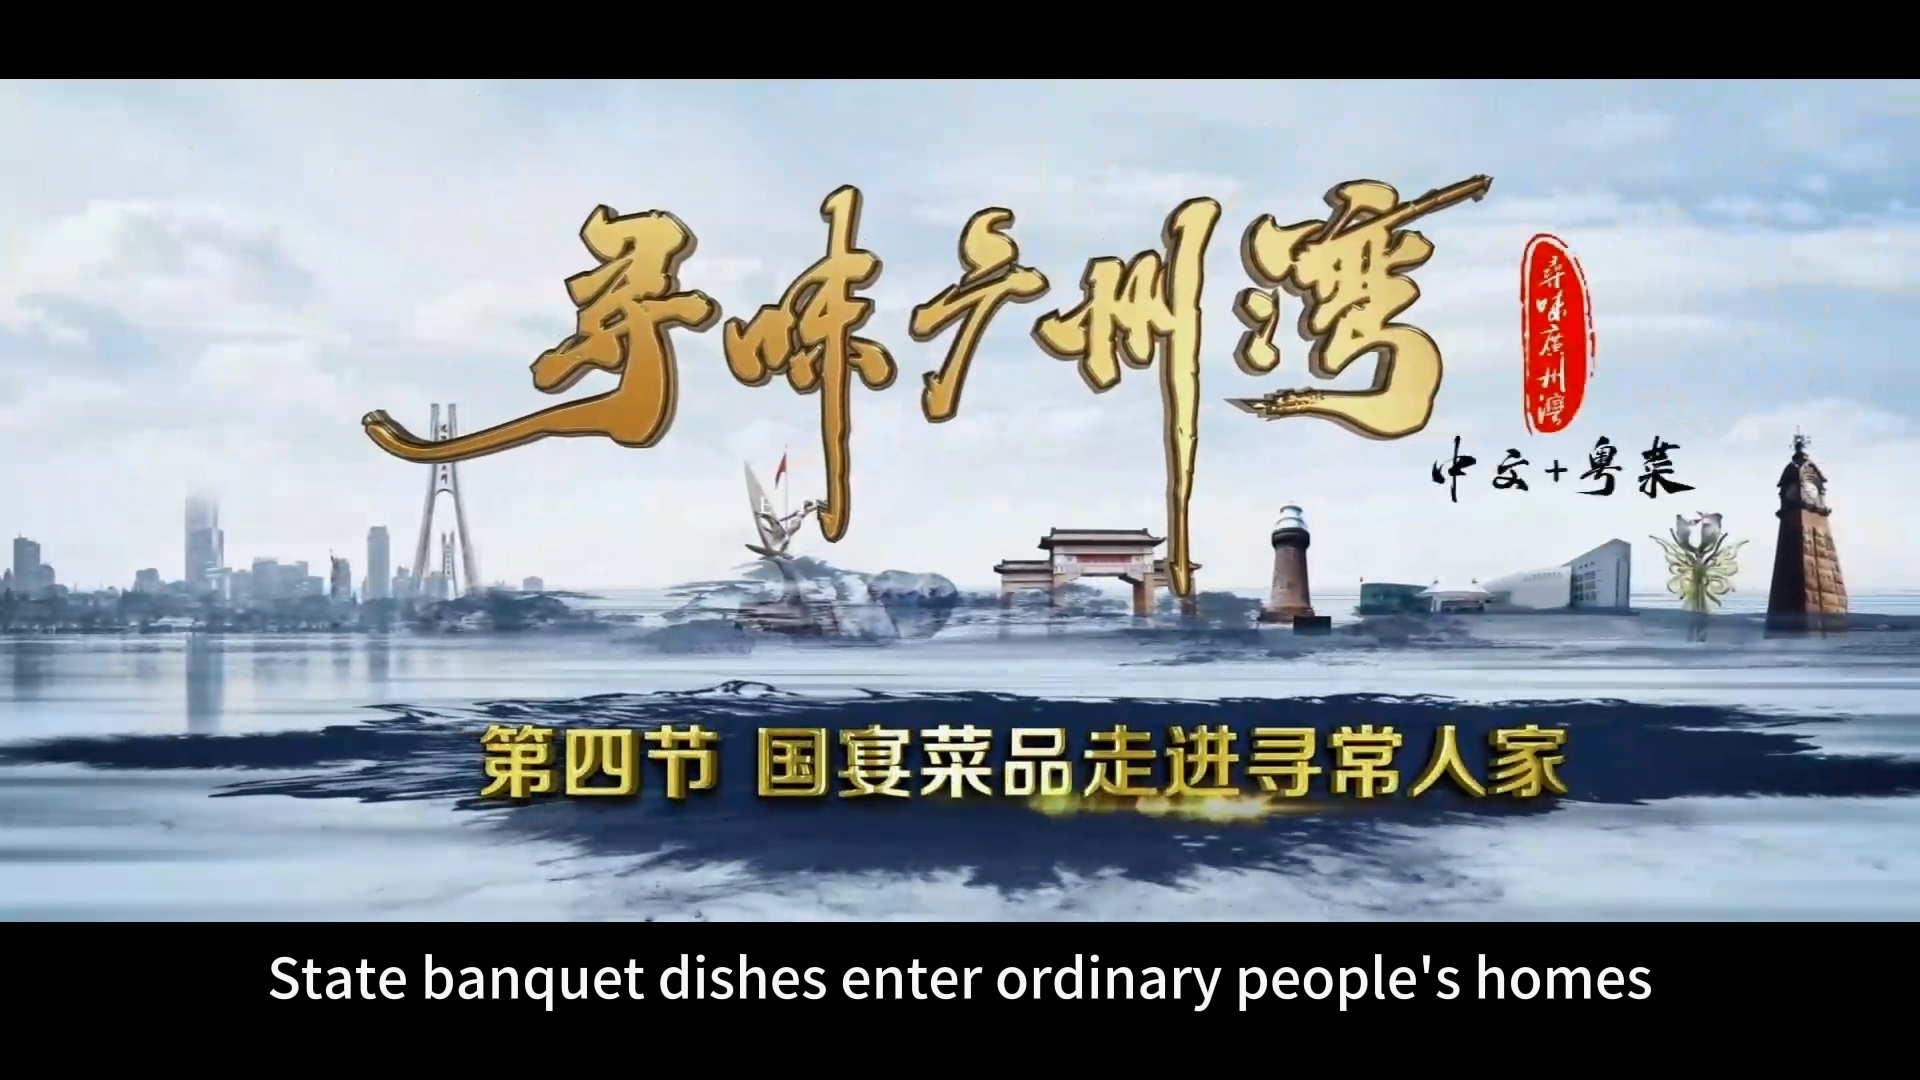 State Banquet Dishes into Ordinary Households